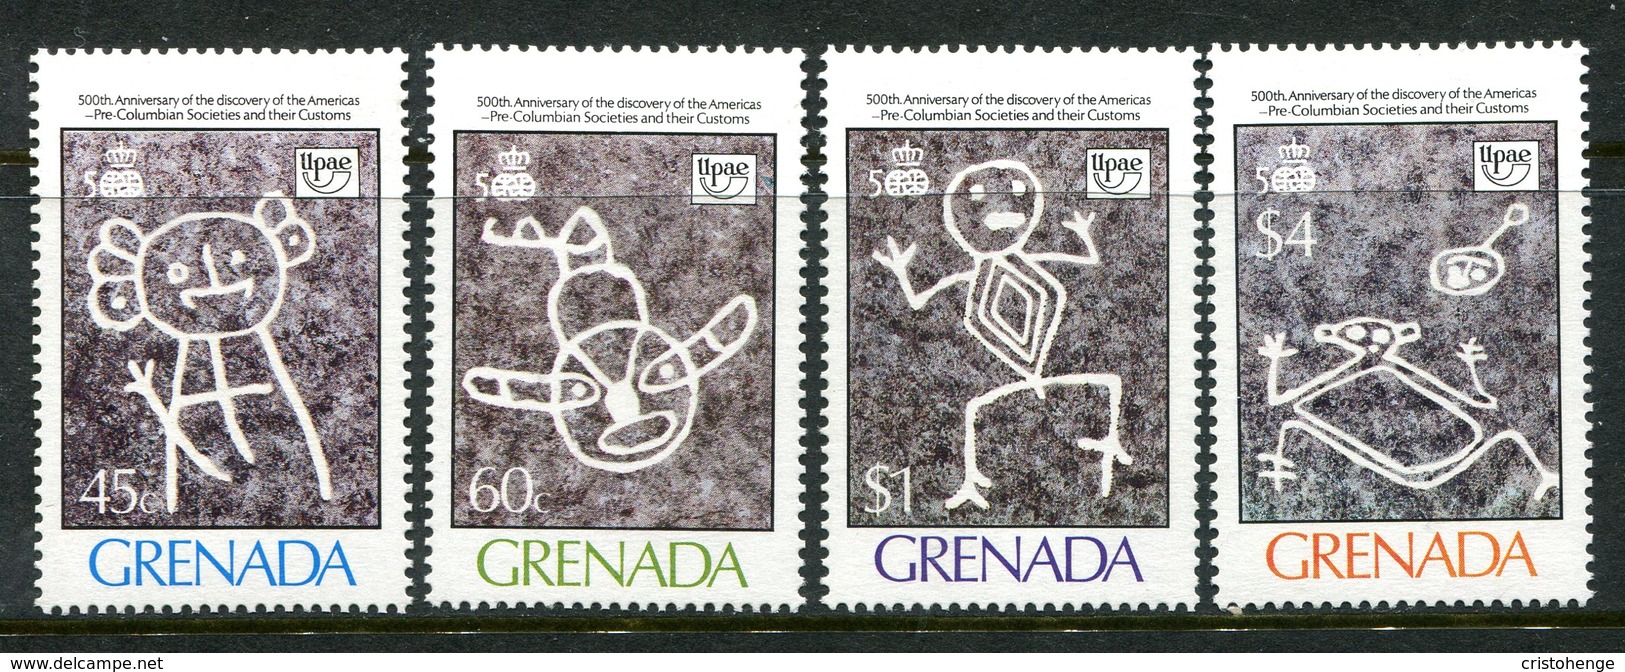 Grenada 1989 500th Anniversary Of Discovery Of America By Columbus - 2nd Issue Set MNH (SG 2051-2054) - Grenada (1974-...)